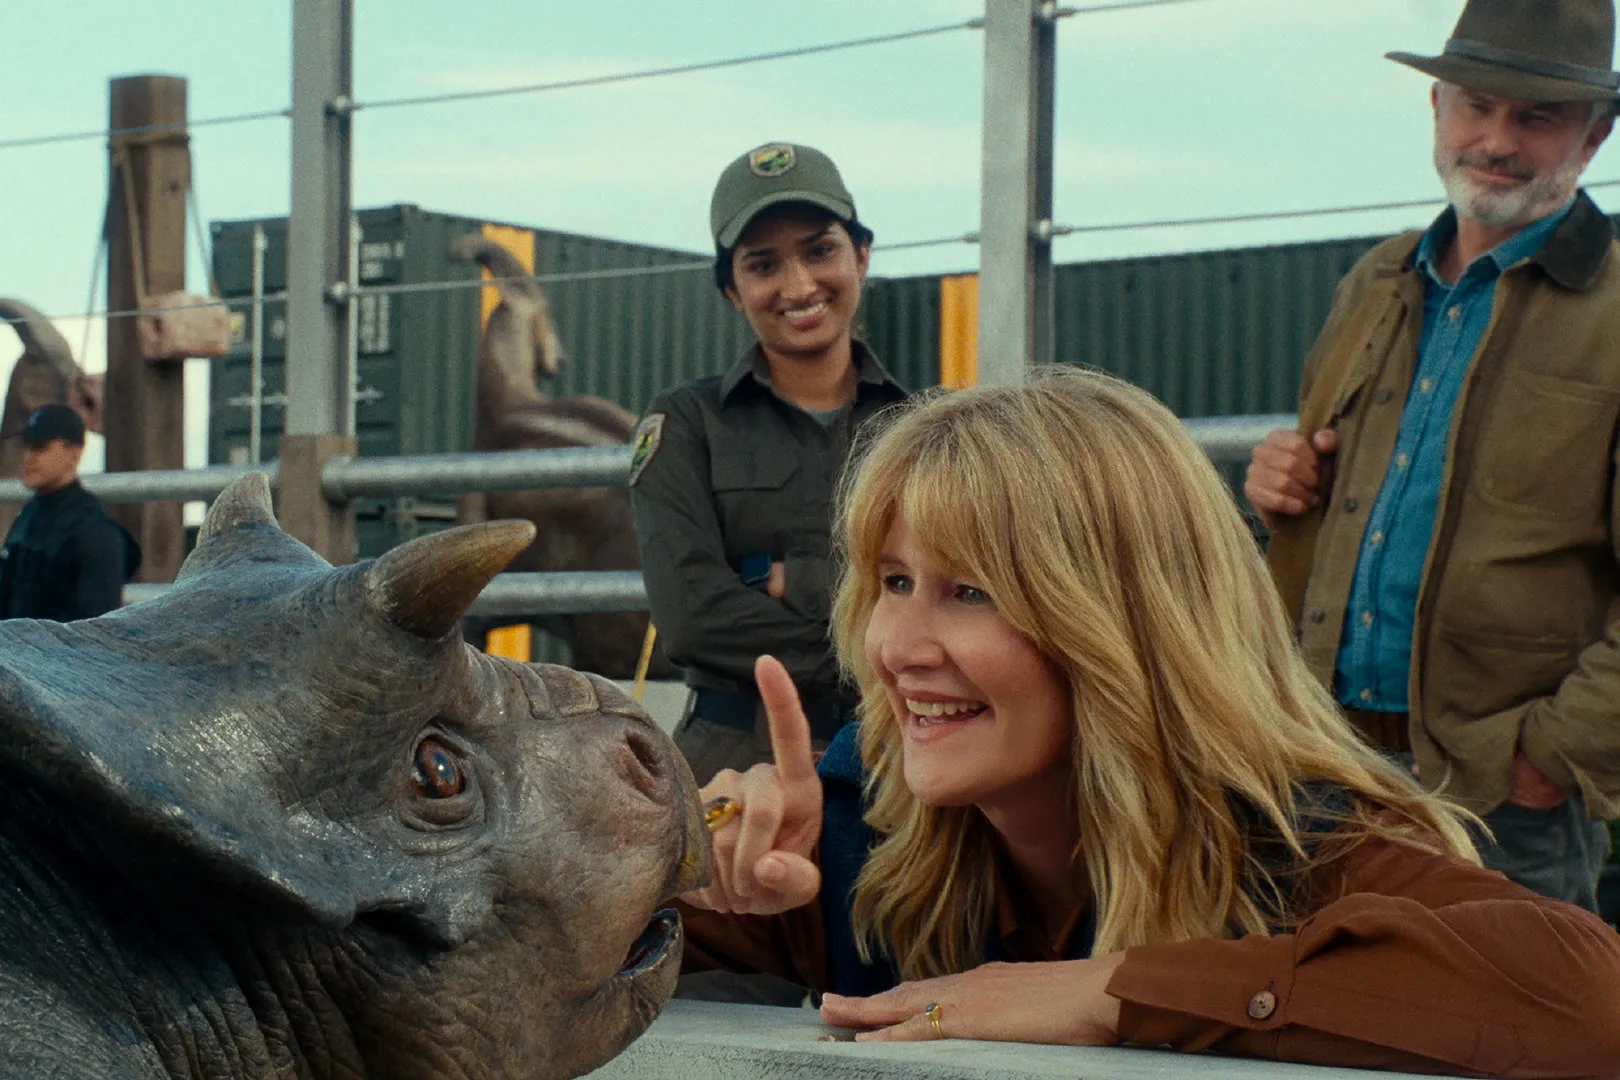 "Hello there!" Ellie and Triceratops, the 'Jurassic' series of affectionate images | FMV6